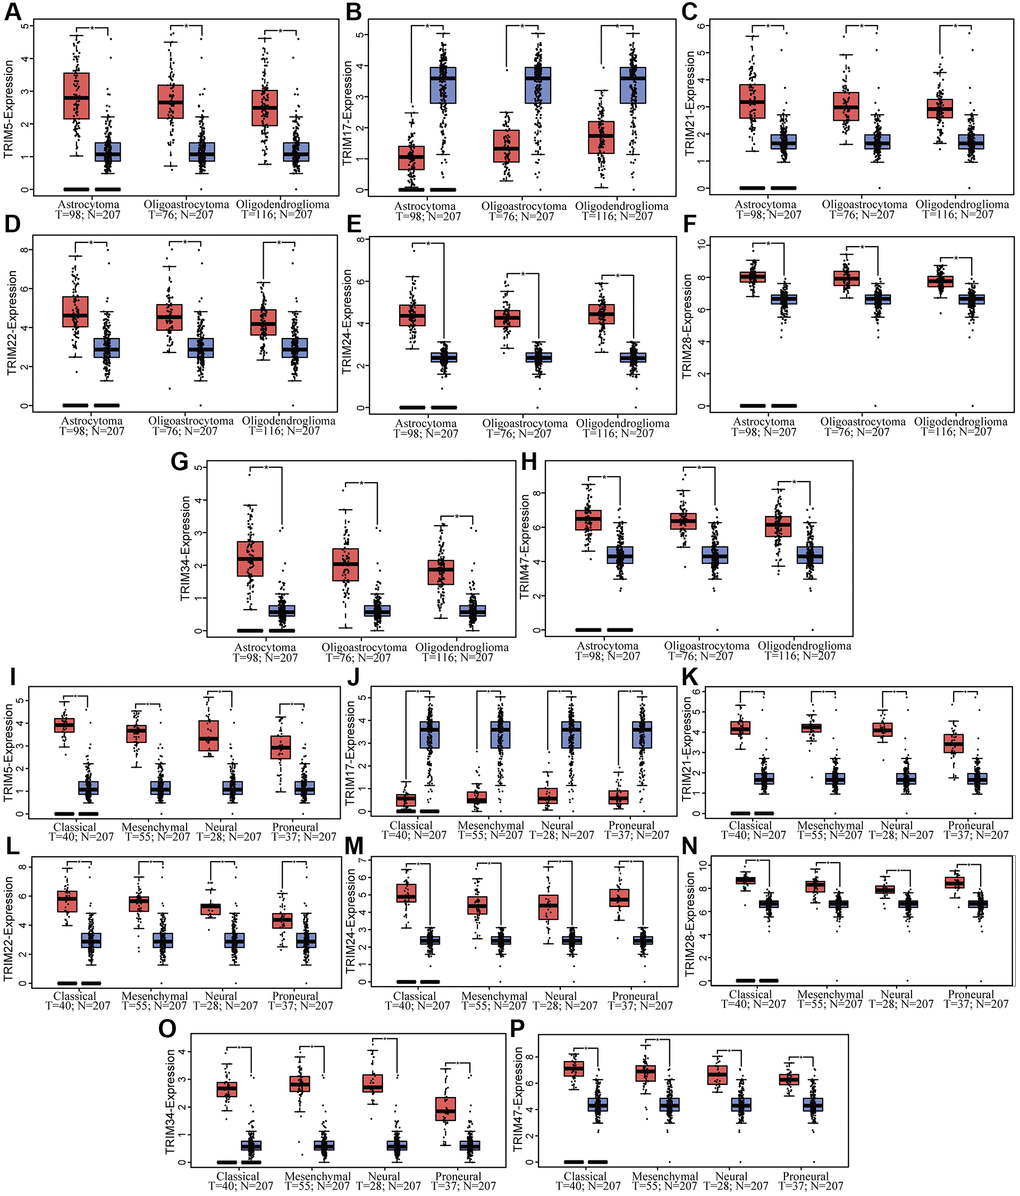 Correlation between TRIM family mRNA expression and different glioma tissue subtypes in patients. The mRNA expressions of TRIM family across LGG and GBM tissue subtypes (A–H), while mRNA expression of TRIM family across different glioma subtypes (I–P).